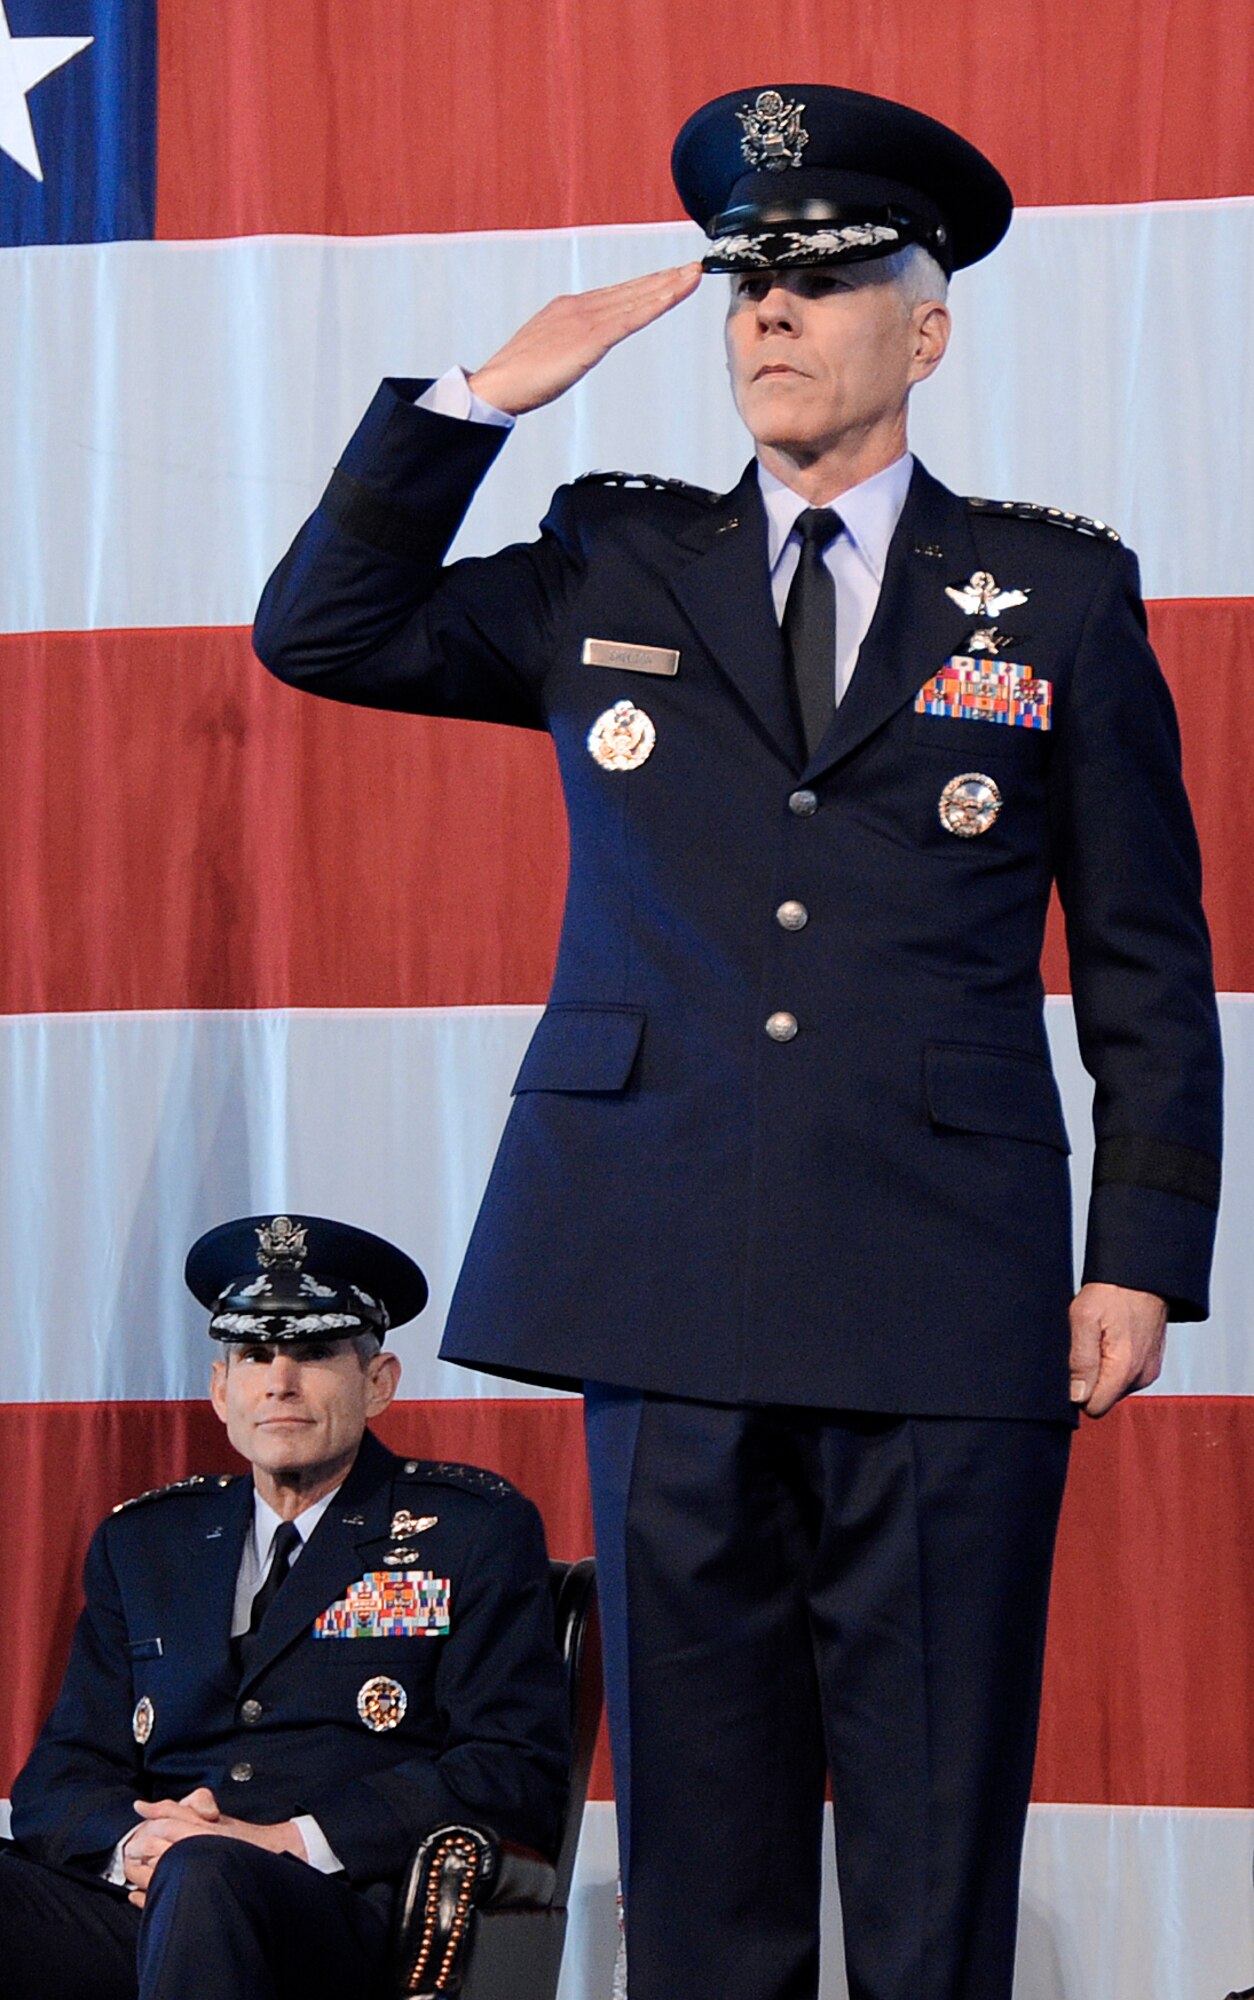 Gen. William L. Shelton receives his first salute from the men and women of Air Force Space Command upon becoming the 15th commander of AFSPC in a ceremony Jan. 5, 2011, at Peterson Air Force Base, Colo. (U.S. Air Force photo/Duncan Wood)